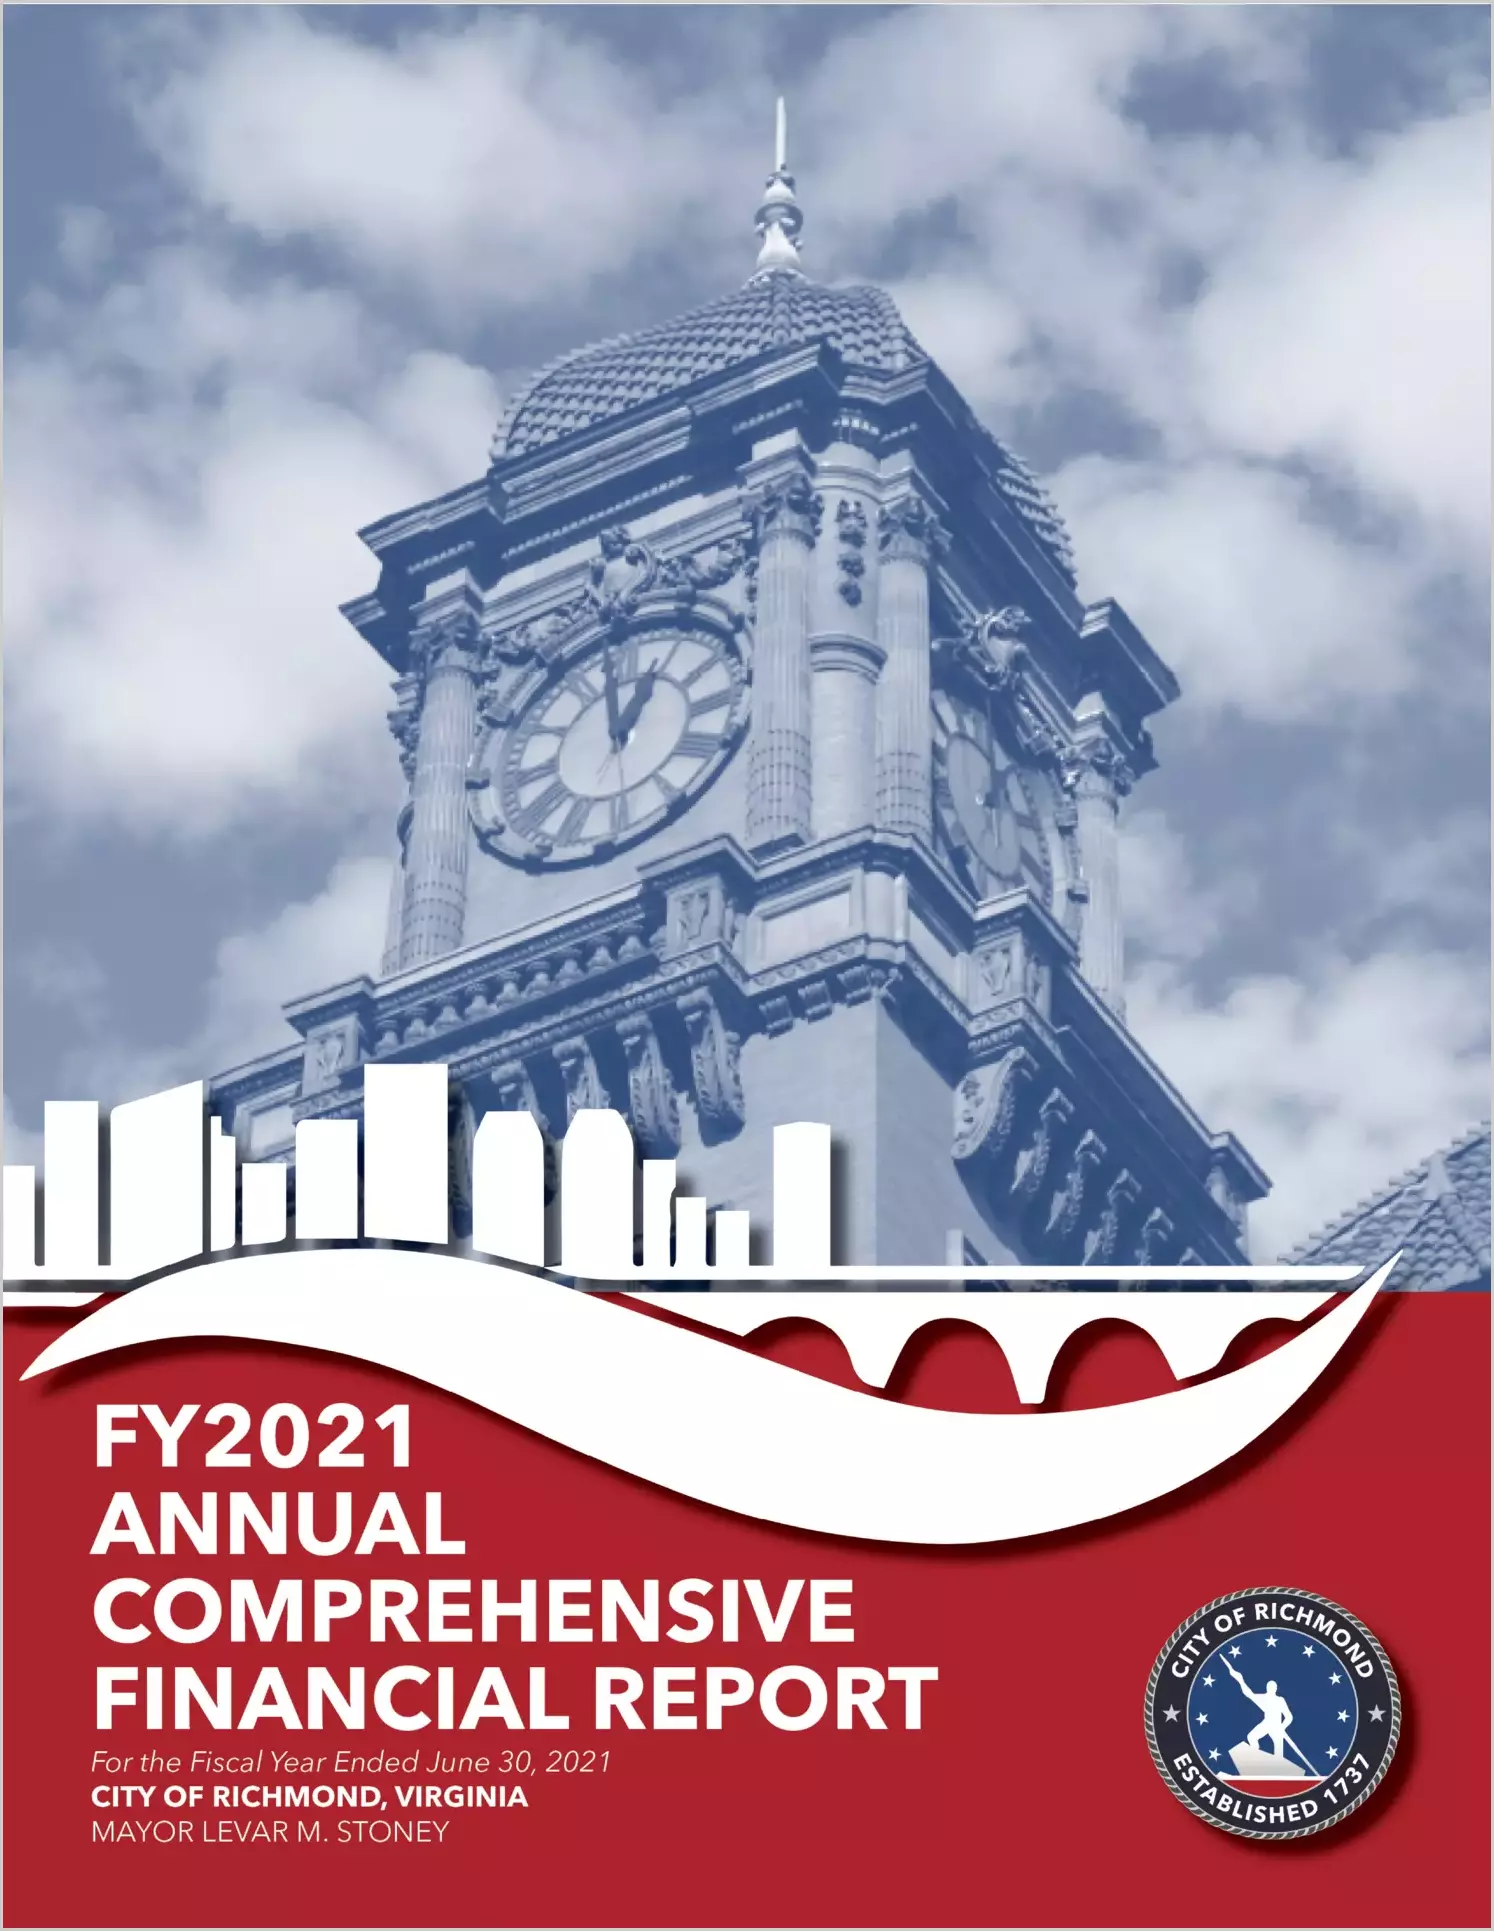 2021 Annual Financial Report for City of Richmond